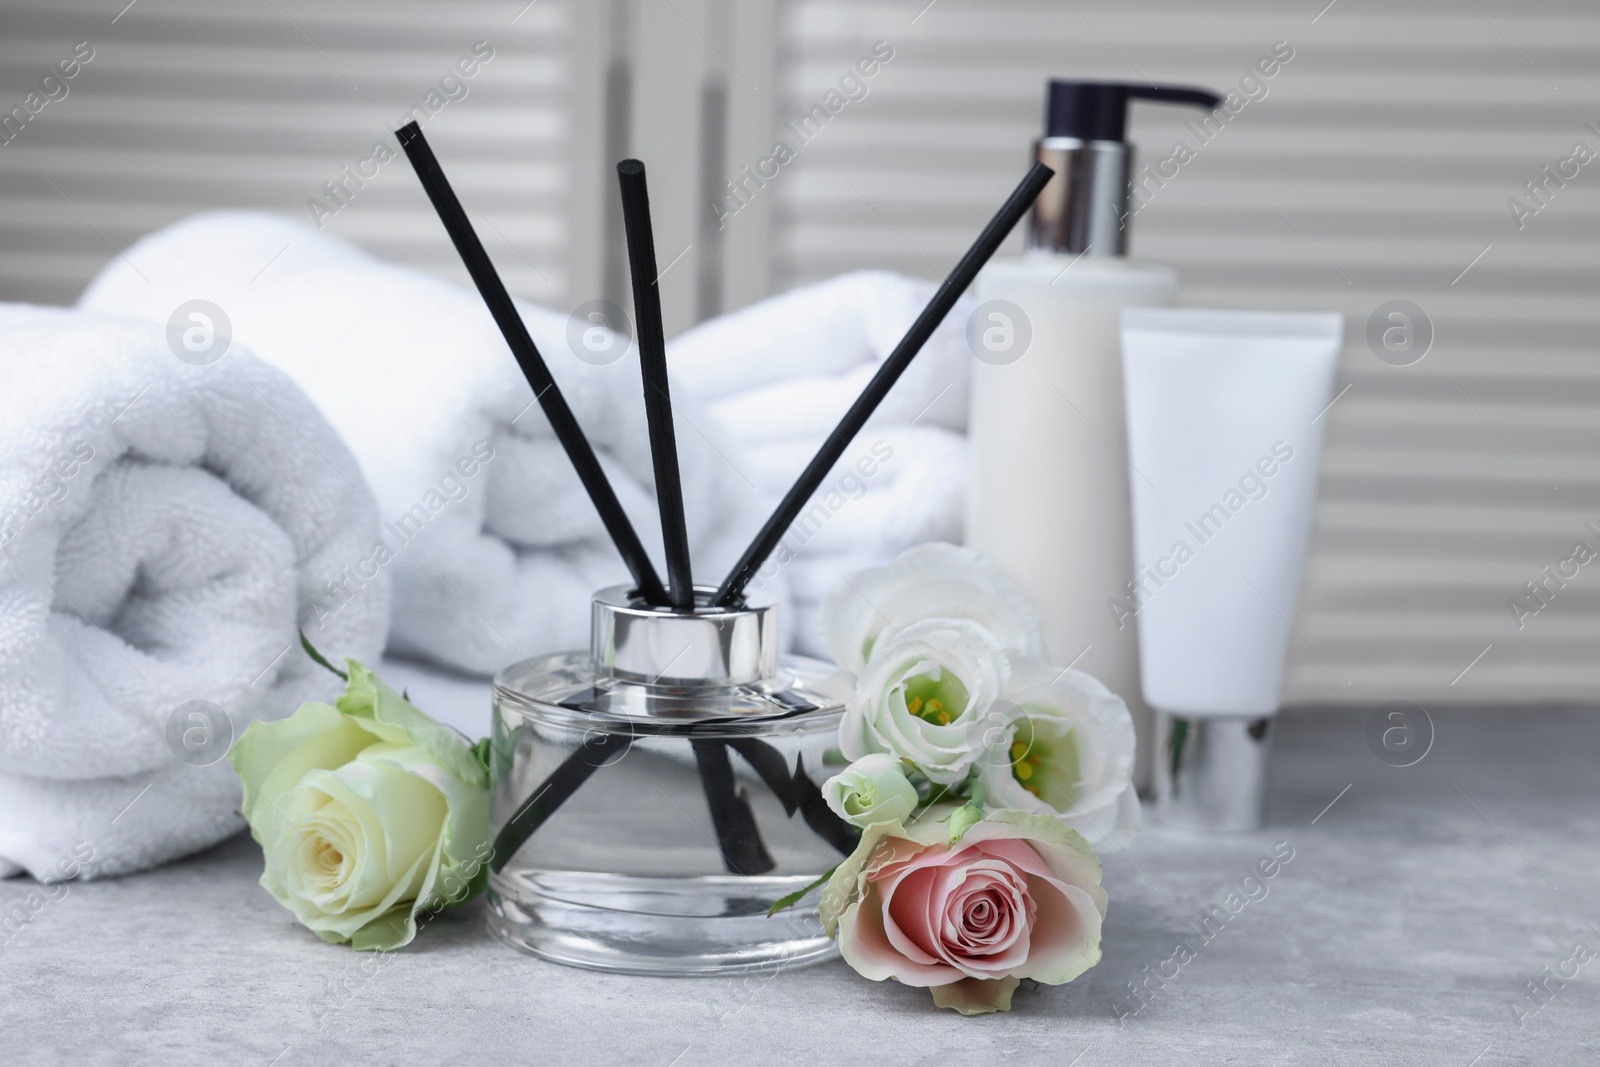 Photo of Towels, reed air freshener, cosmetic products and flowers on grey table indoors